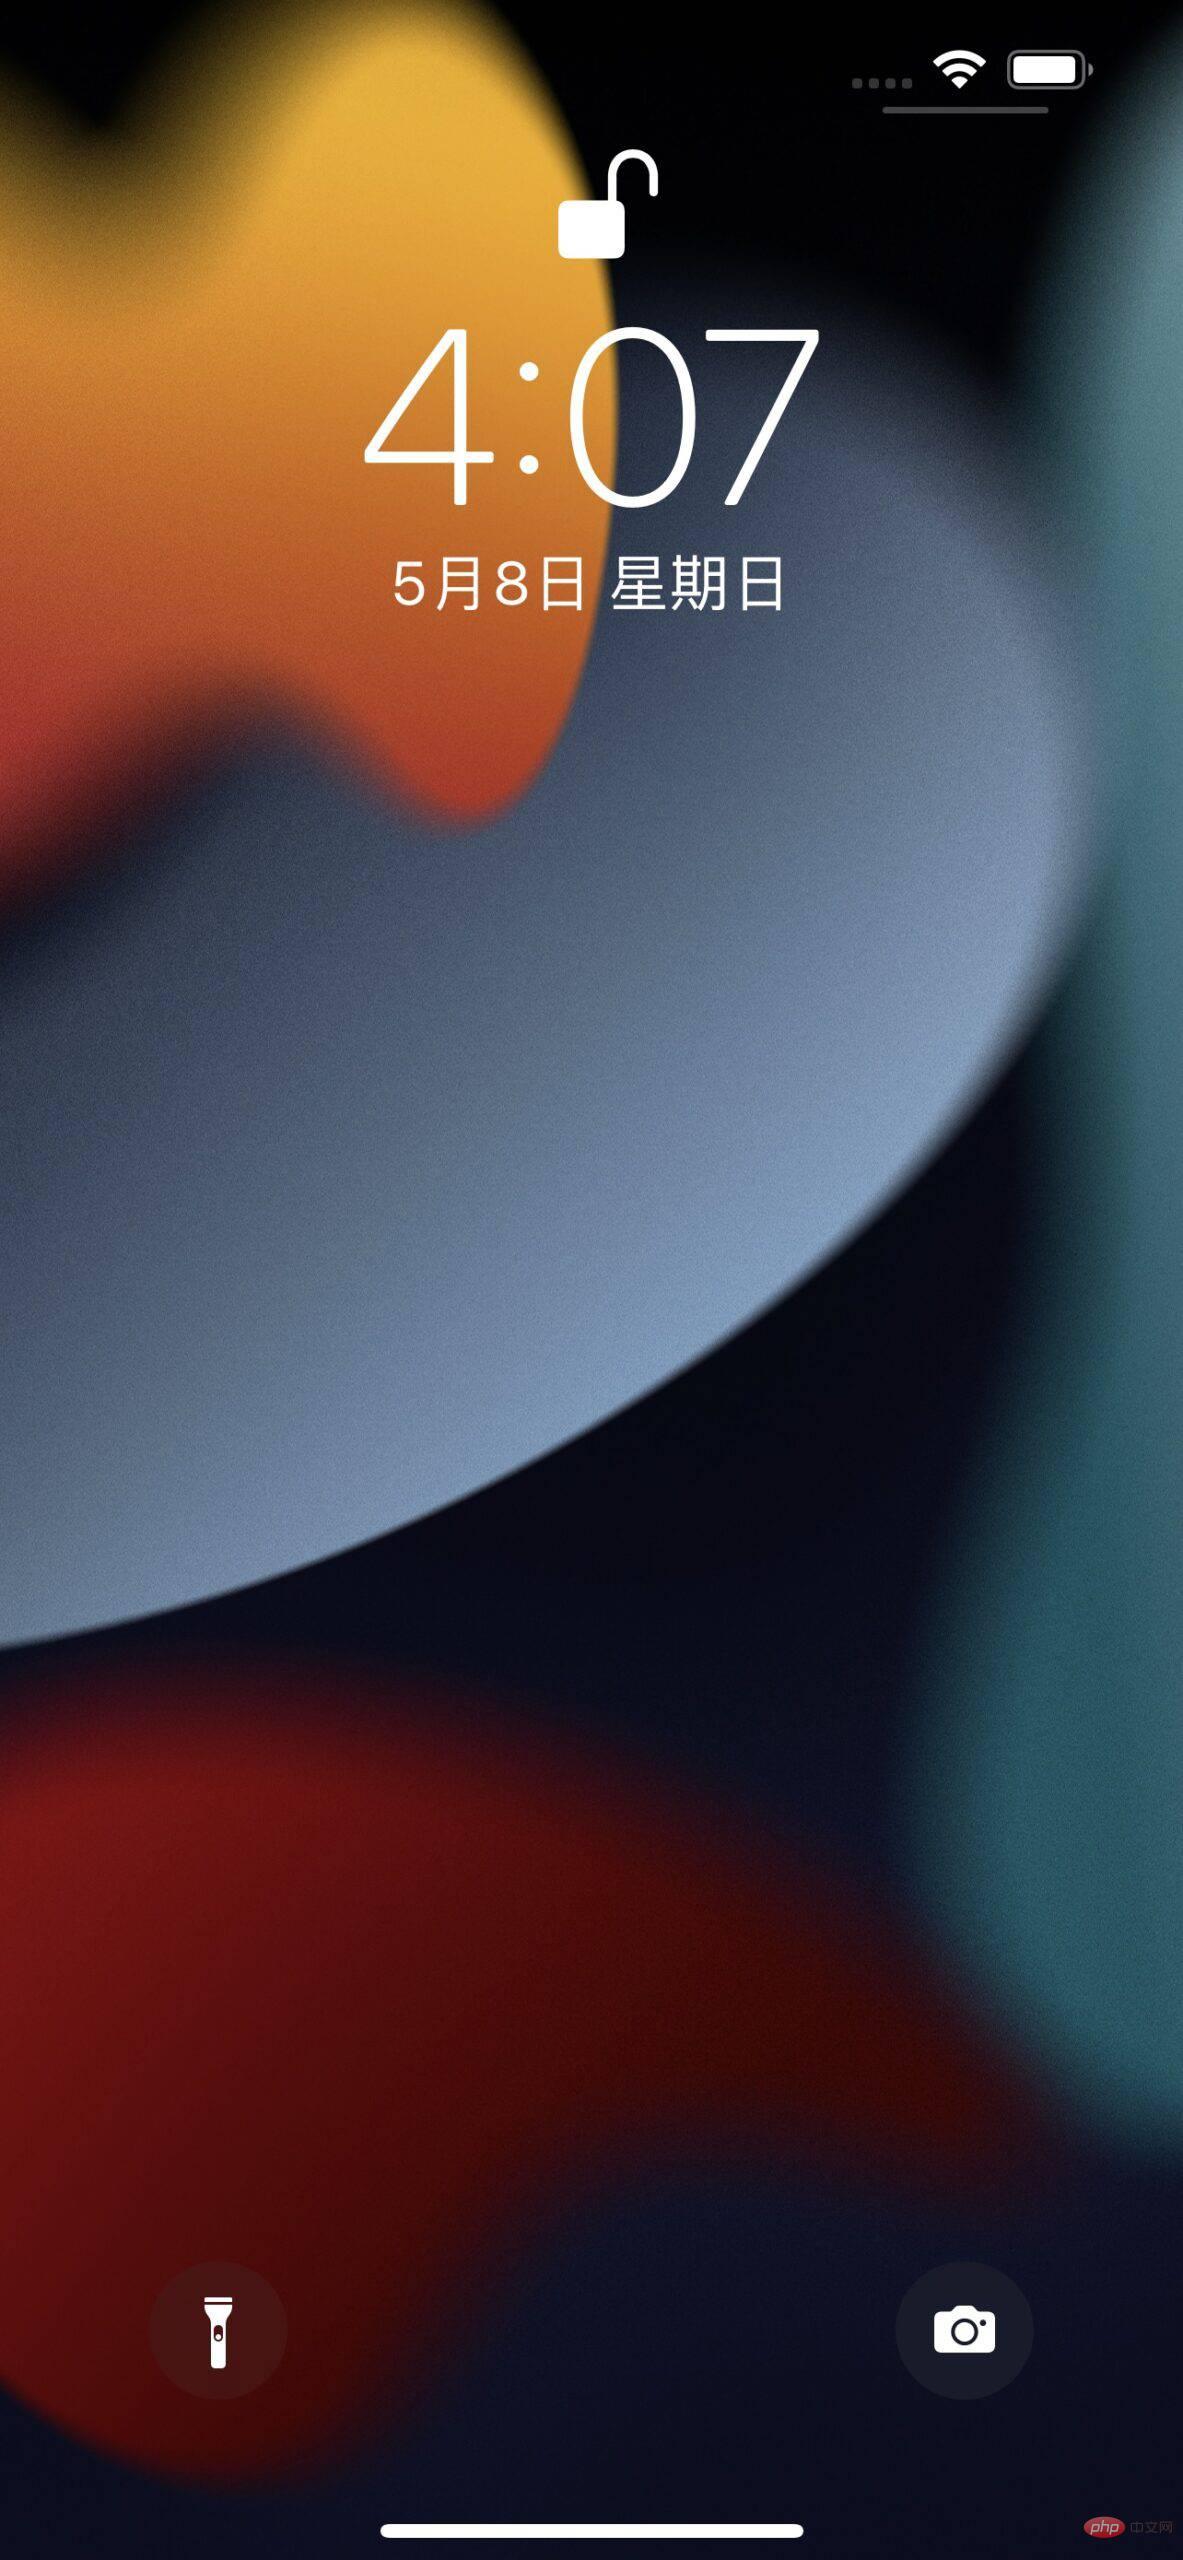 How to hide the lunar date on the iPhone lock screen?